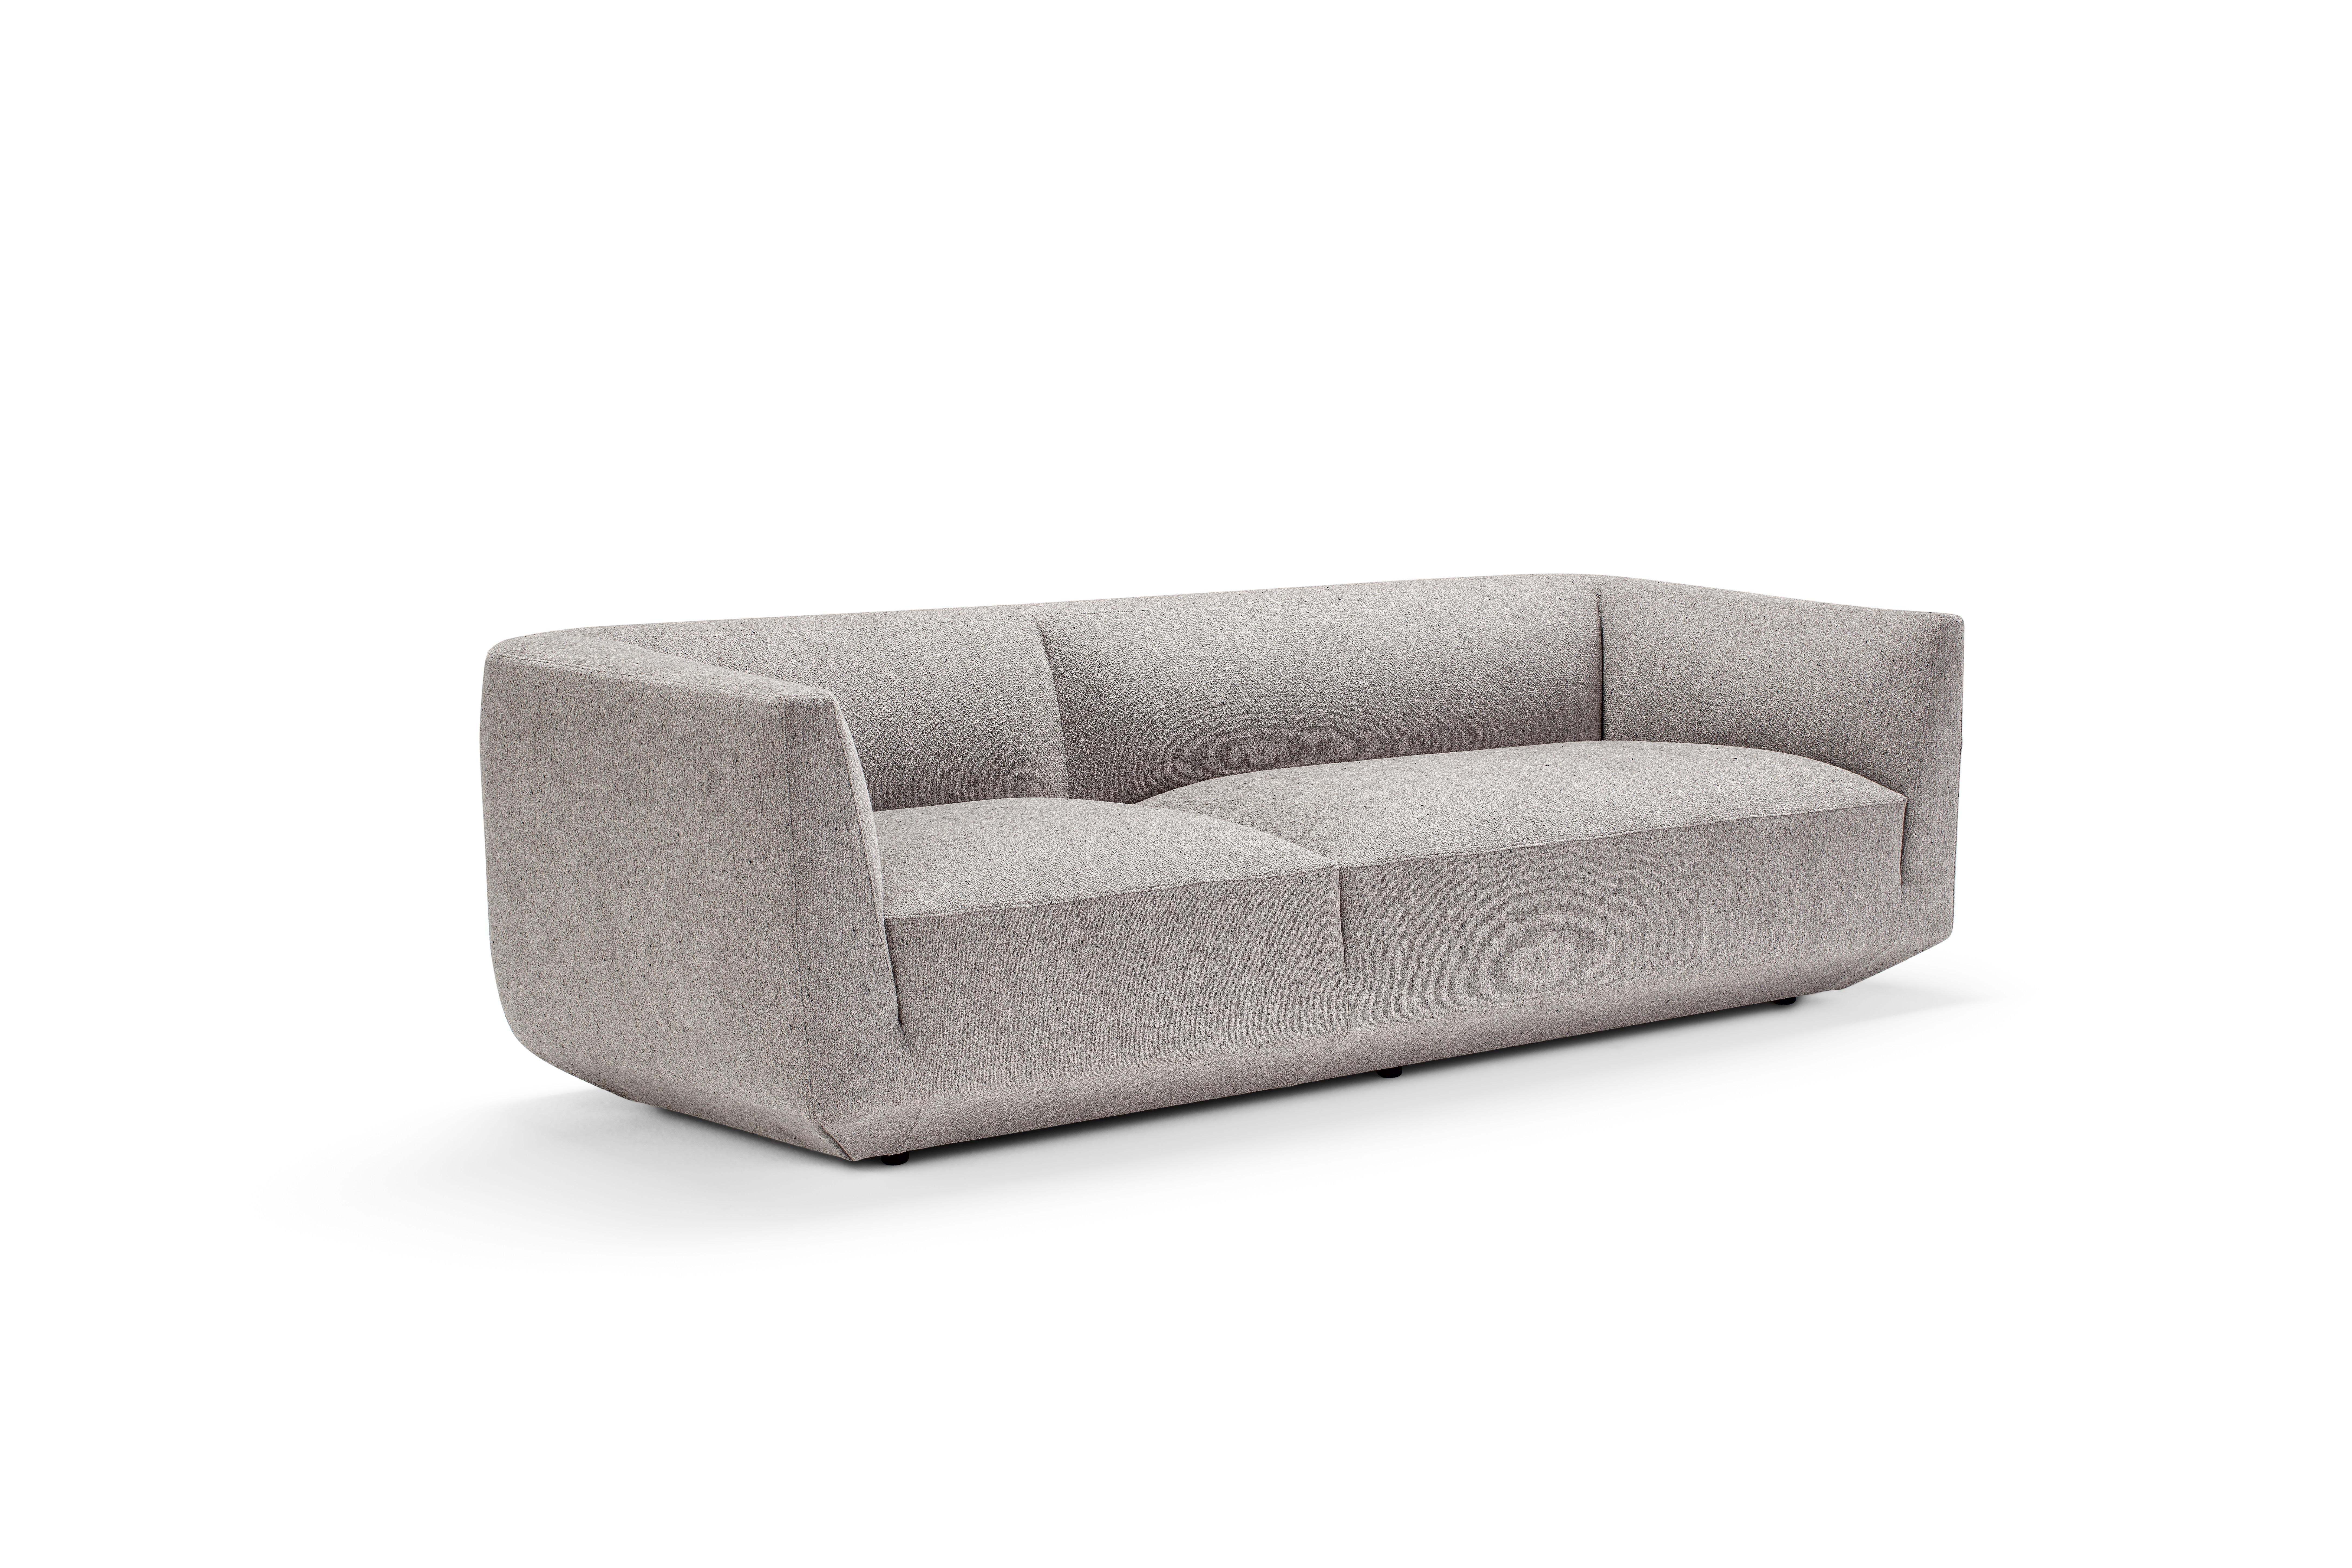 Panis sofa by Amura Lab.
Model 583.

Dimensions : H. 70 x 245 x 92 cm.

Fabric reference in picture : Trama 216 

More modules available in different fabrics and colors.
 
“Soft shapes declinable in all possible configurations”. The iconic